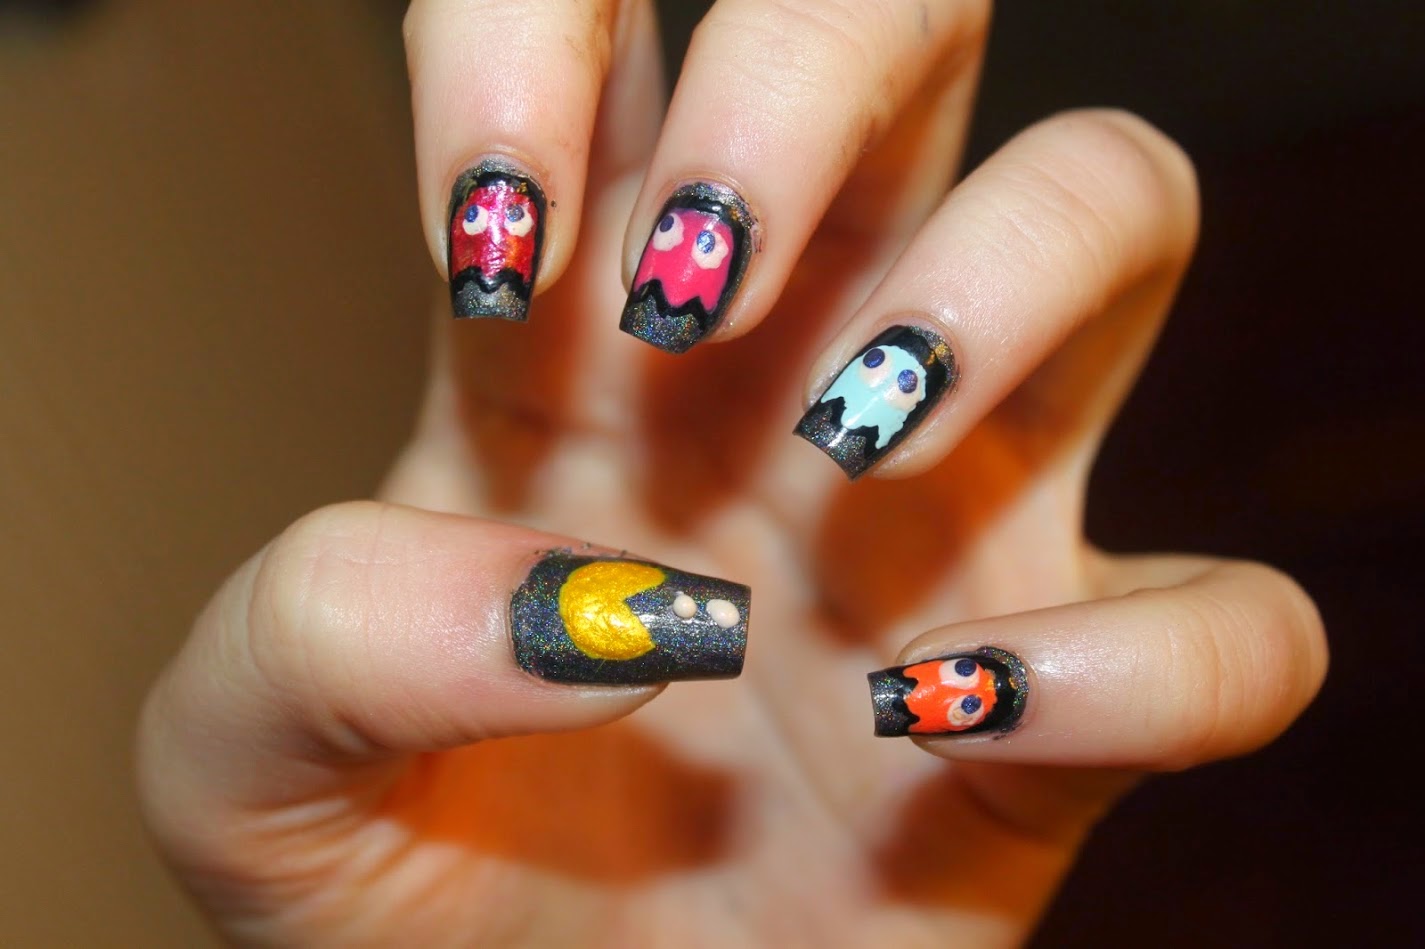 By My Fingertips: Pacman Nail Art